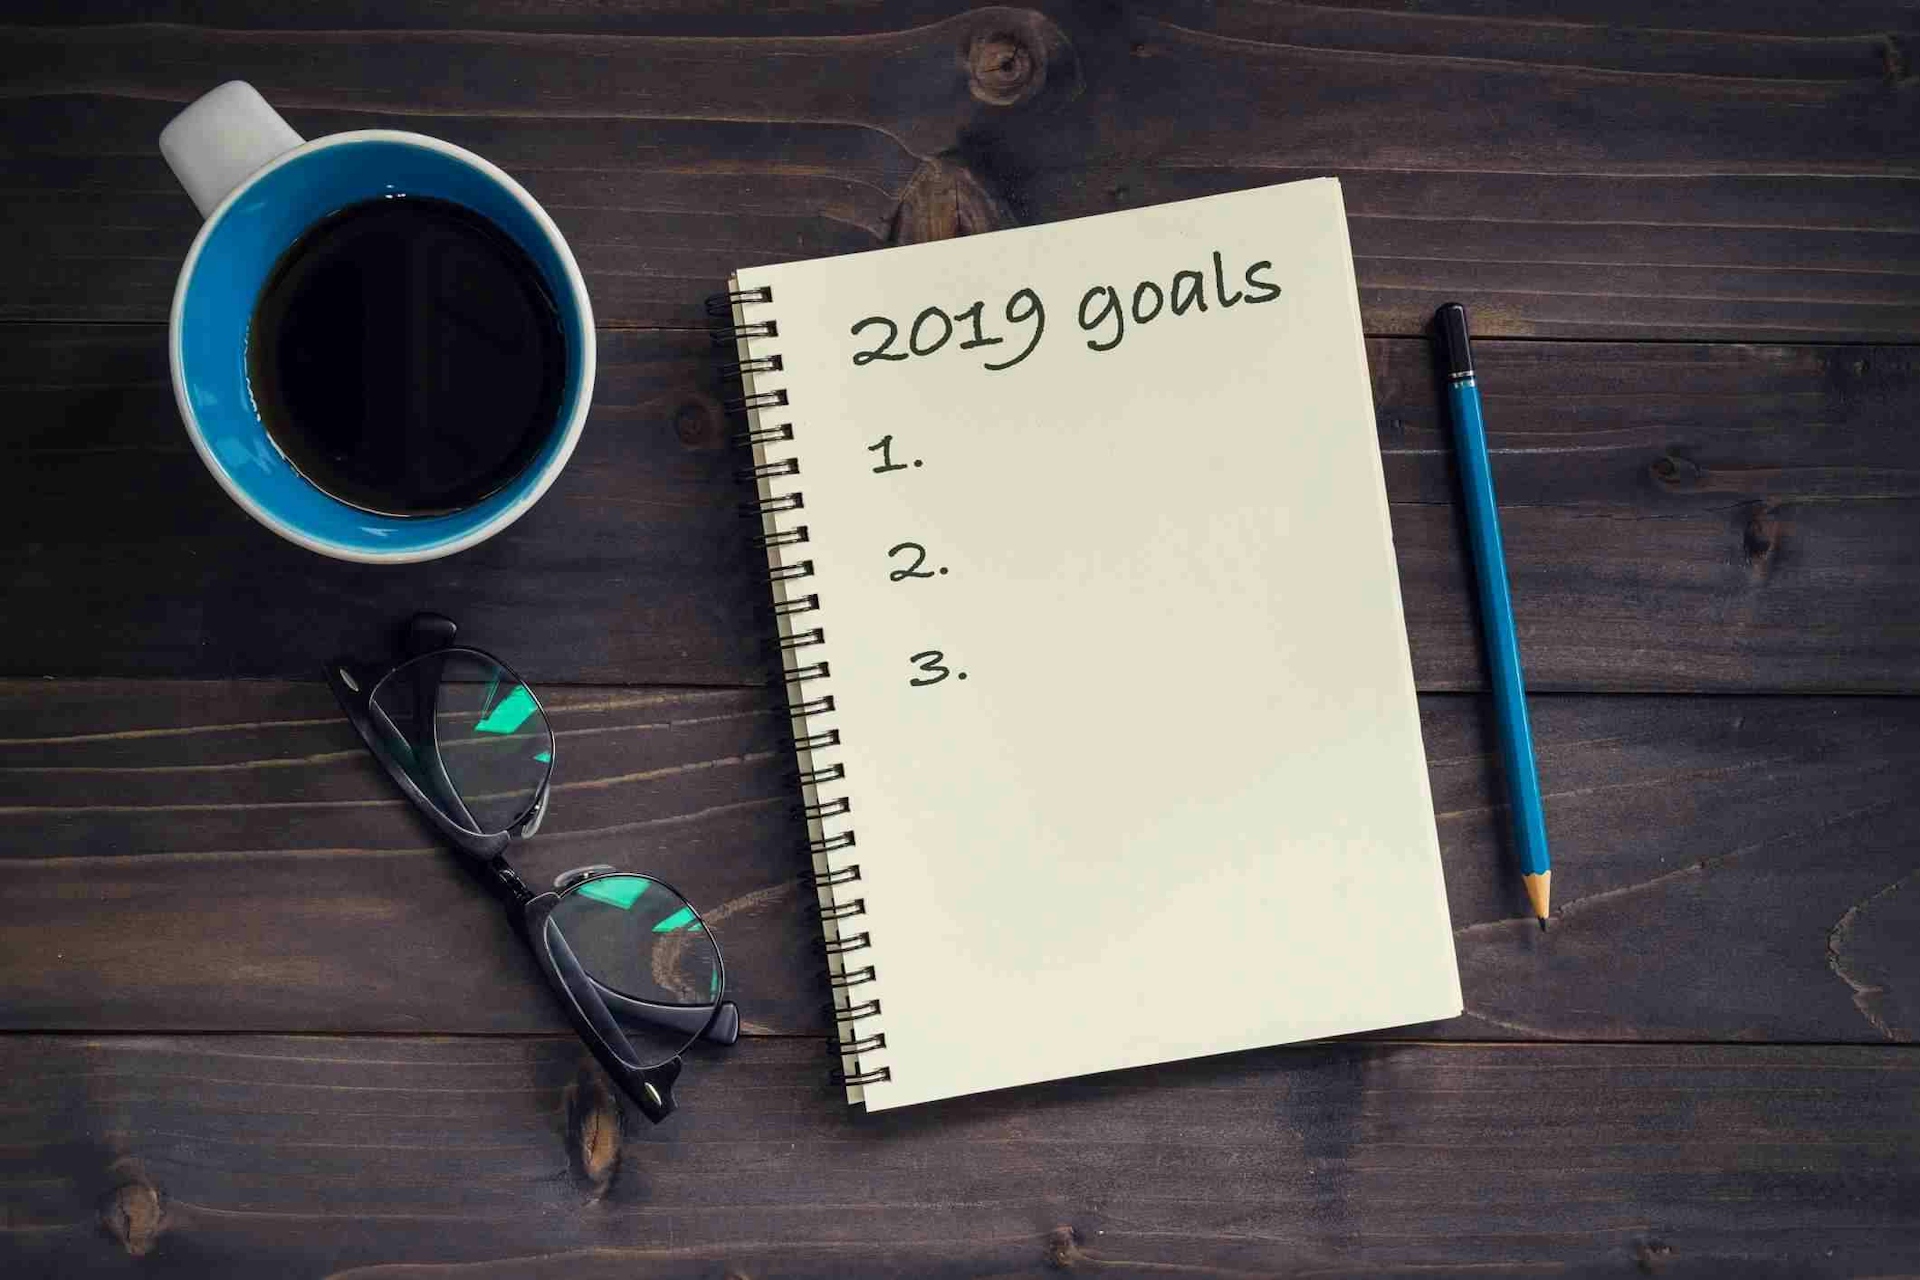 Your online masterclass host for this week can help you set goals to double your business growth in 2019